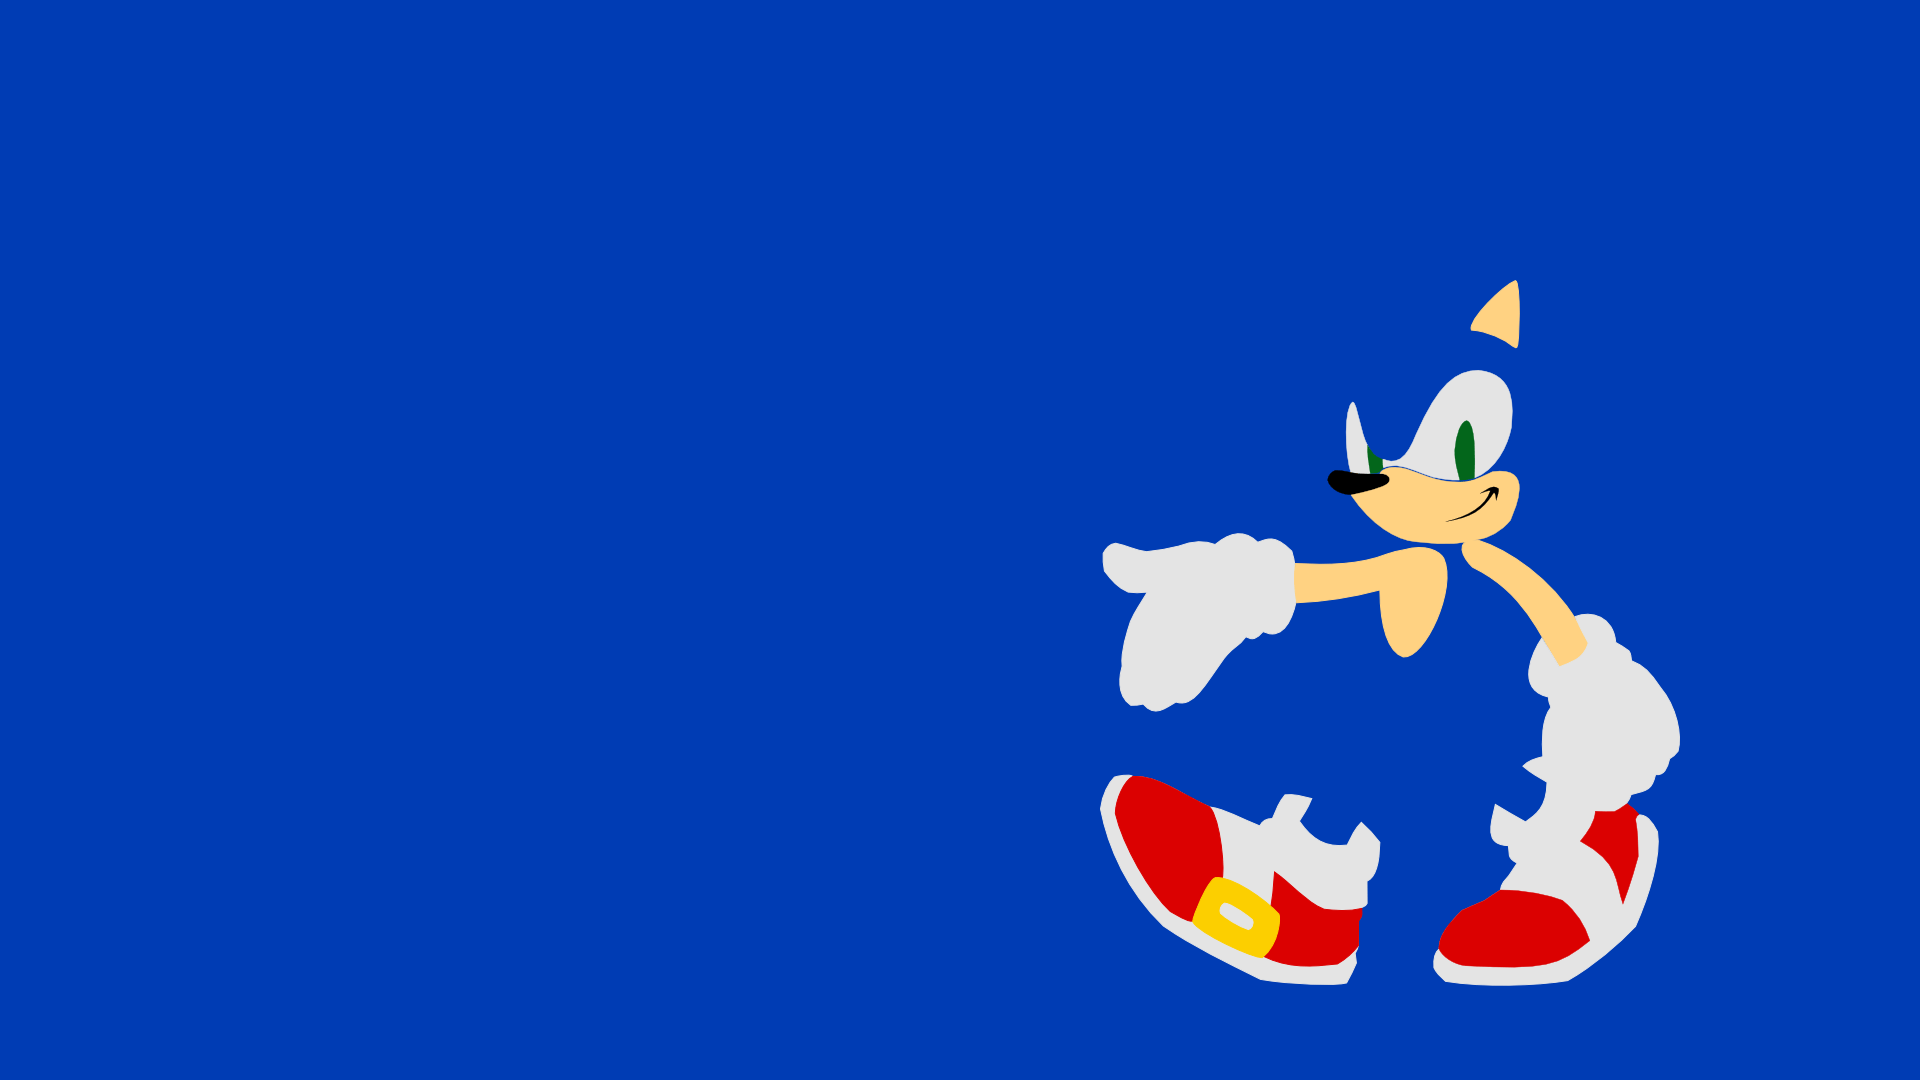 Sonic The Hedgehog Wallpaper, Picture, Image